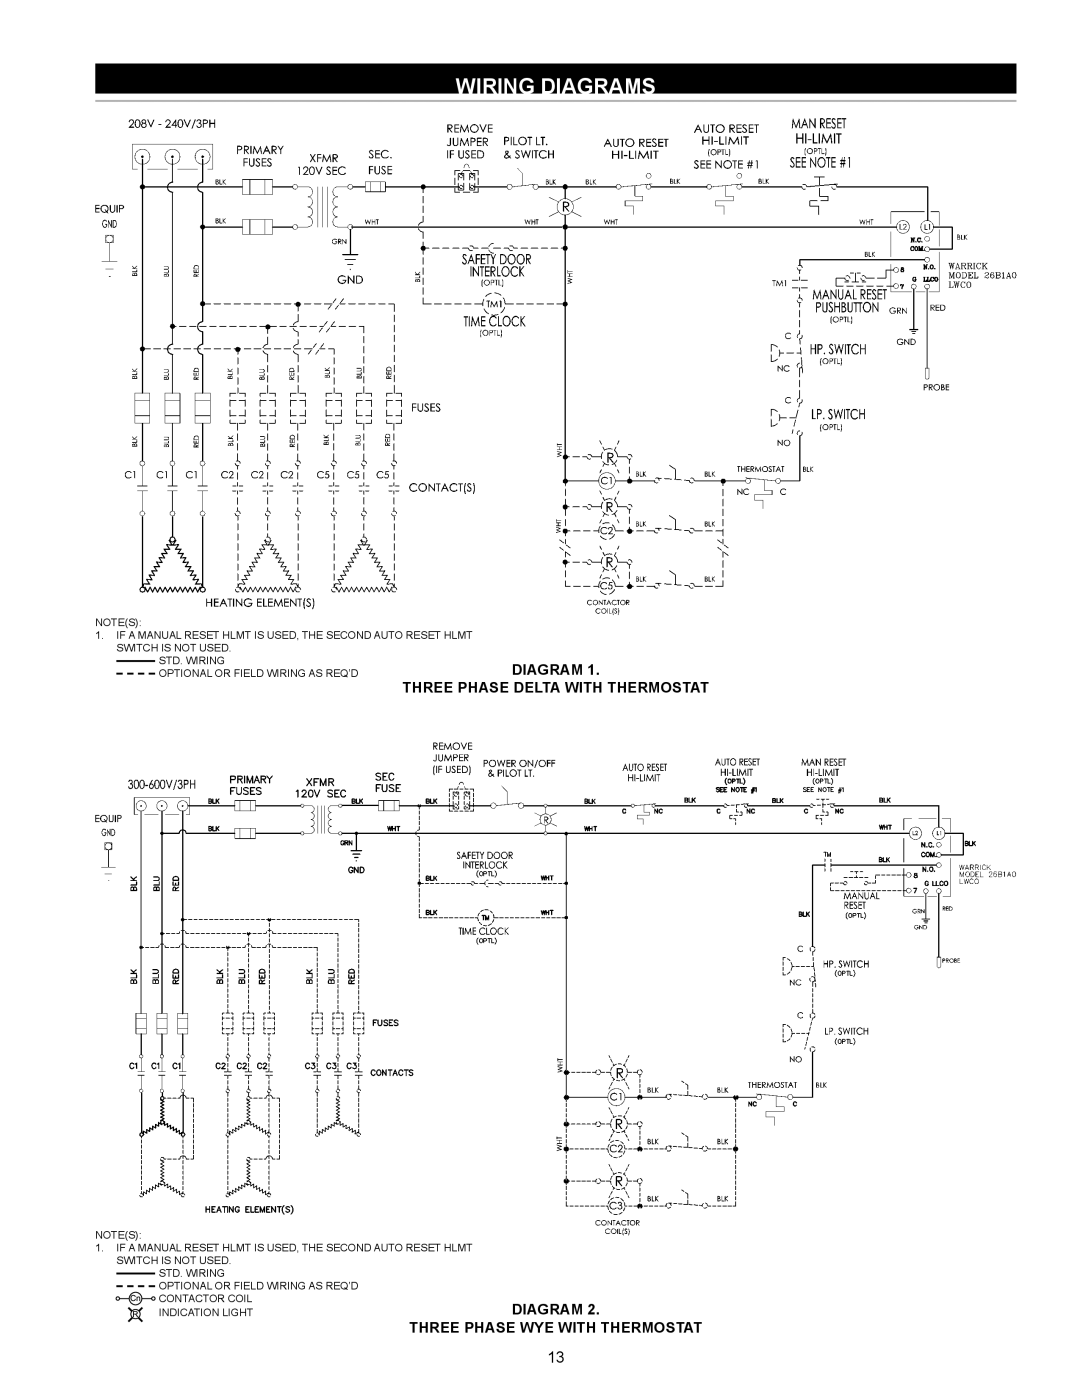 State Industries SW 37-670 Wiring Diagrams, Std. Wiring Optional Or Field Wiring As Req’D, Contactor Coil Indication Light 